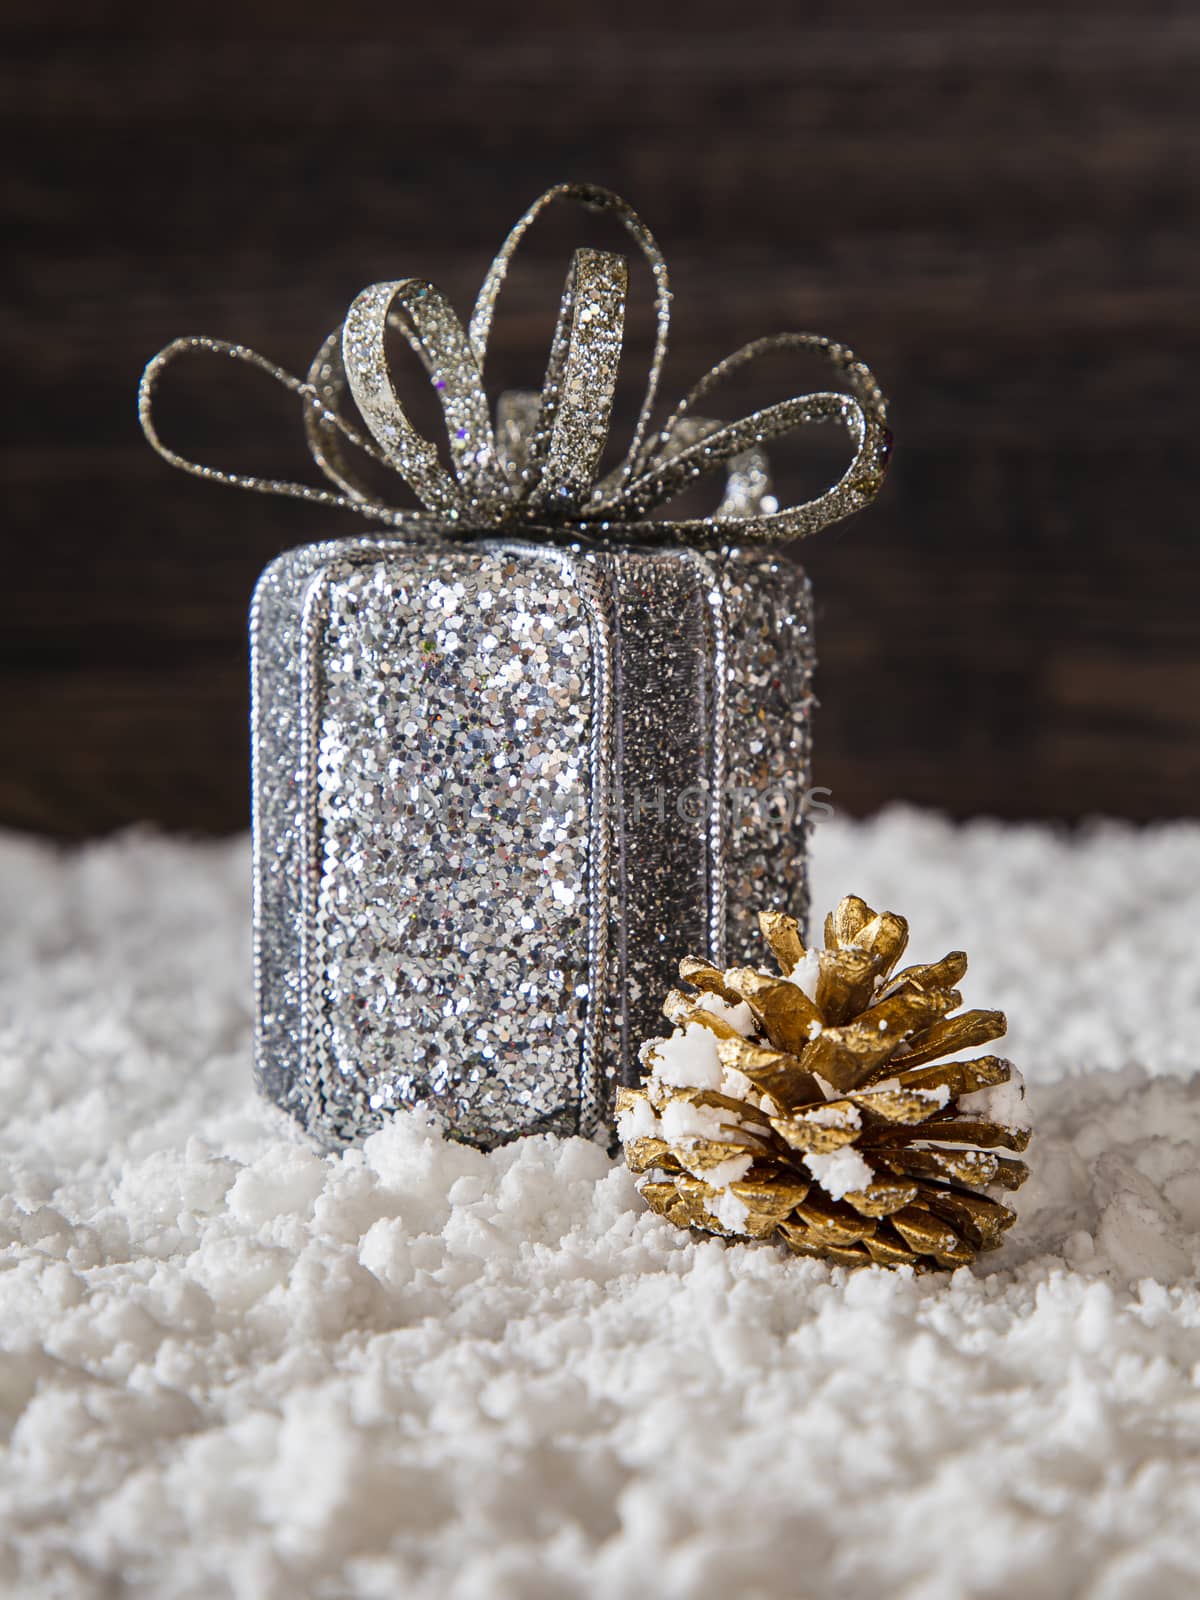 silver wrap present and golden pine cone in the snow against a wood background